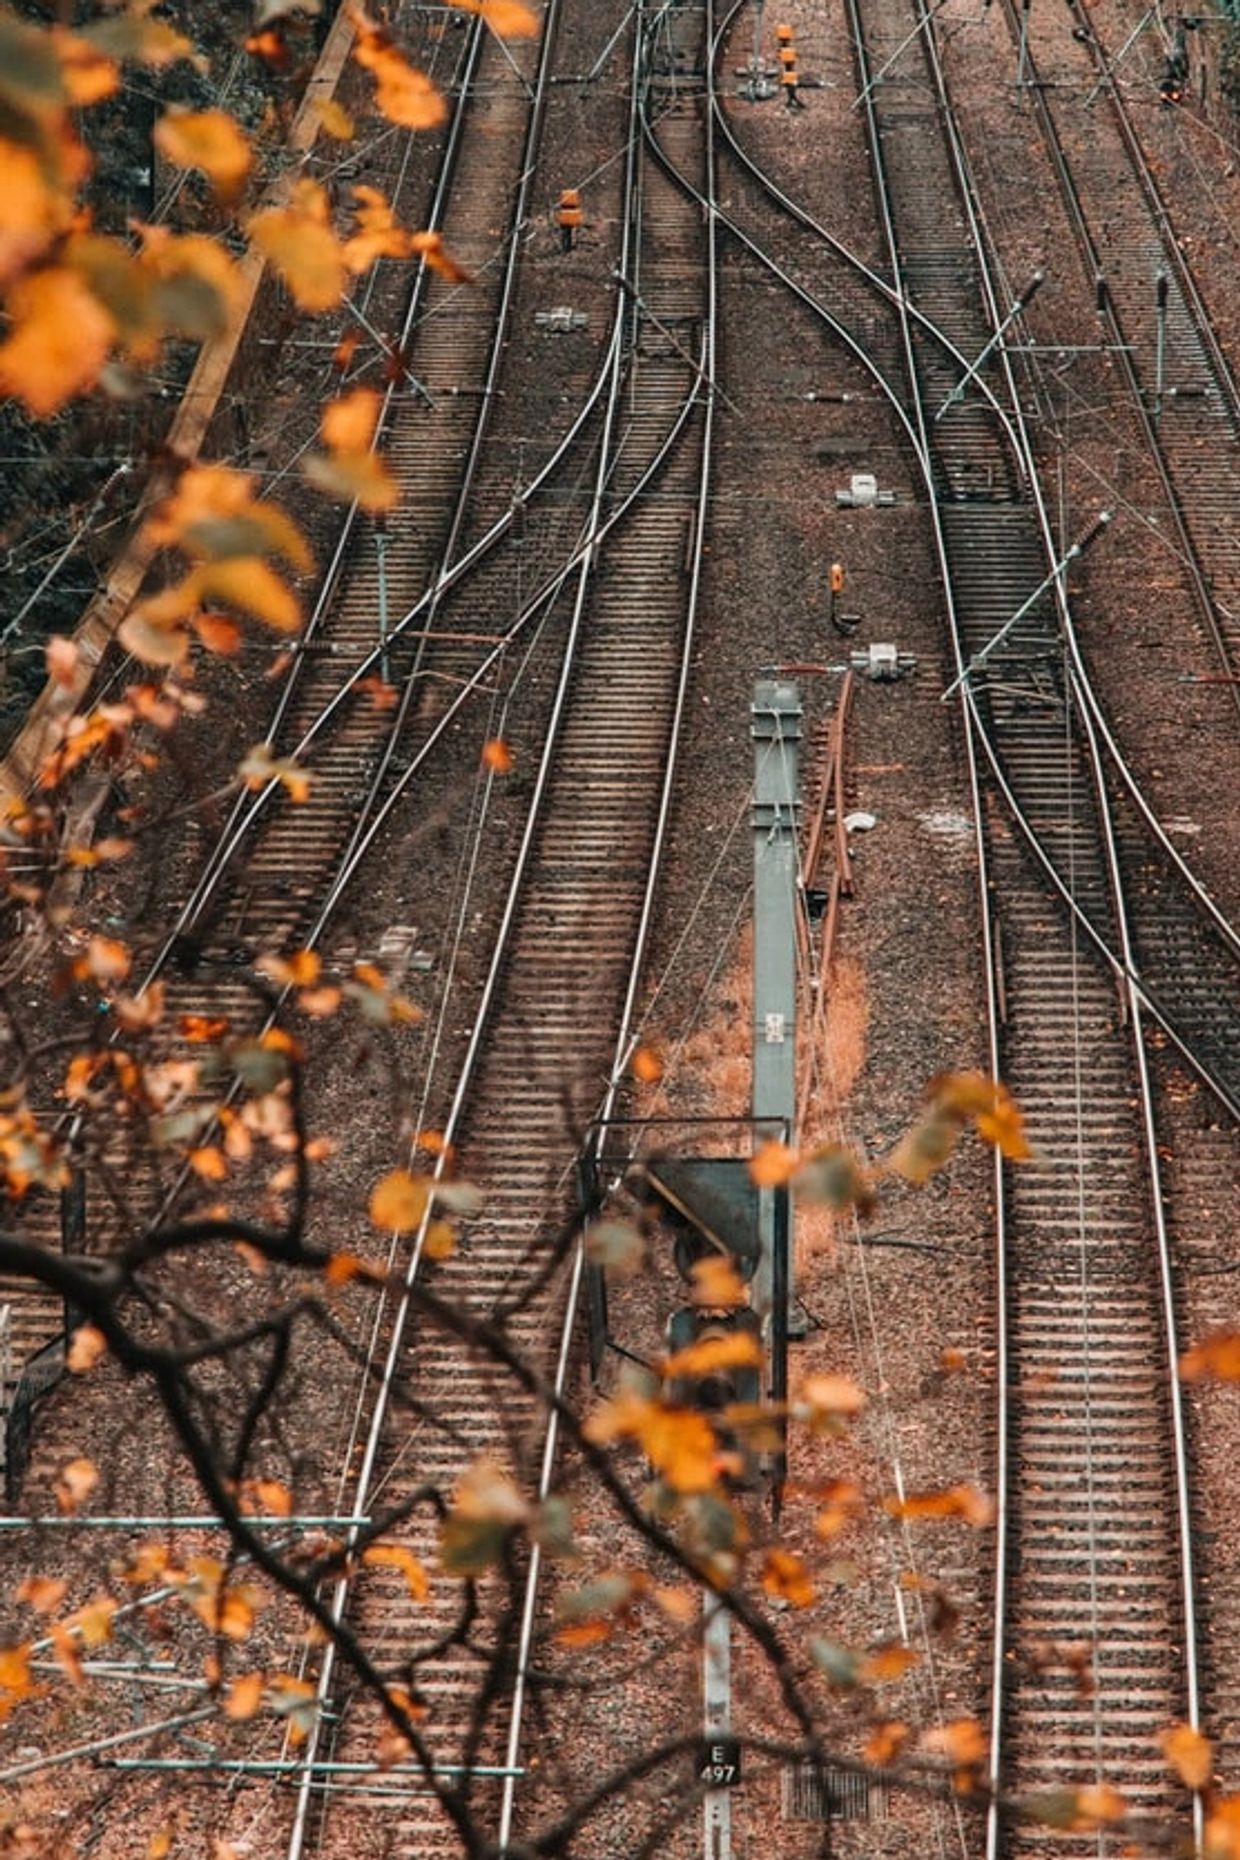 Stretch of railway showing tracks criss-crossing and Autumn leaves.